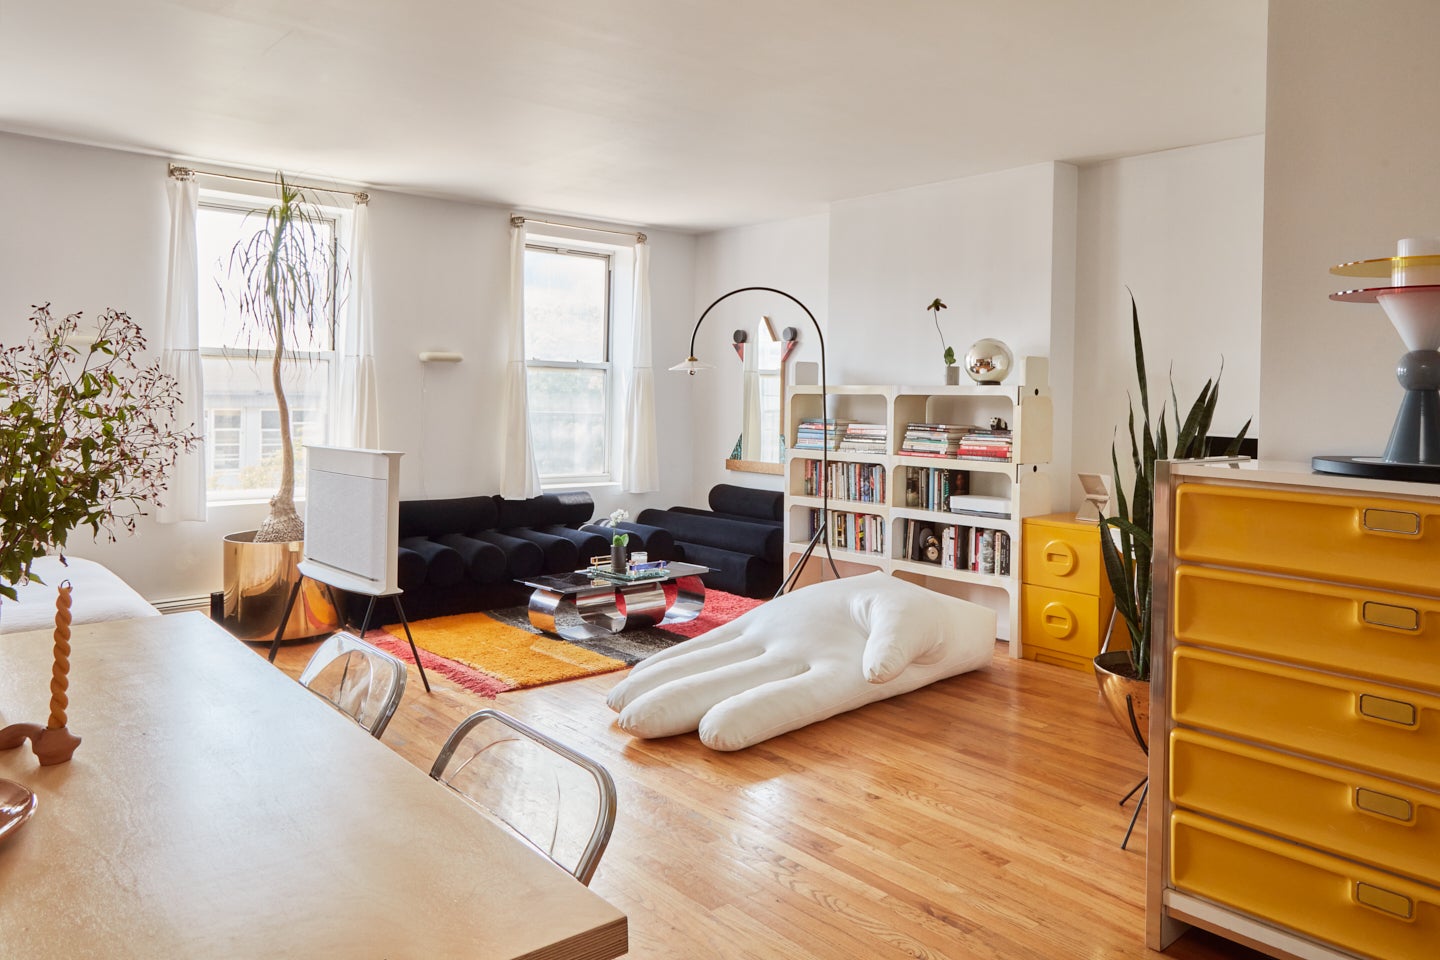 Studio apartment with giant hand pillow